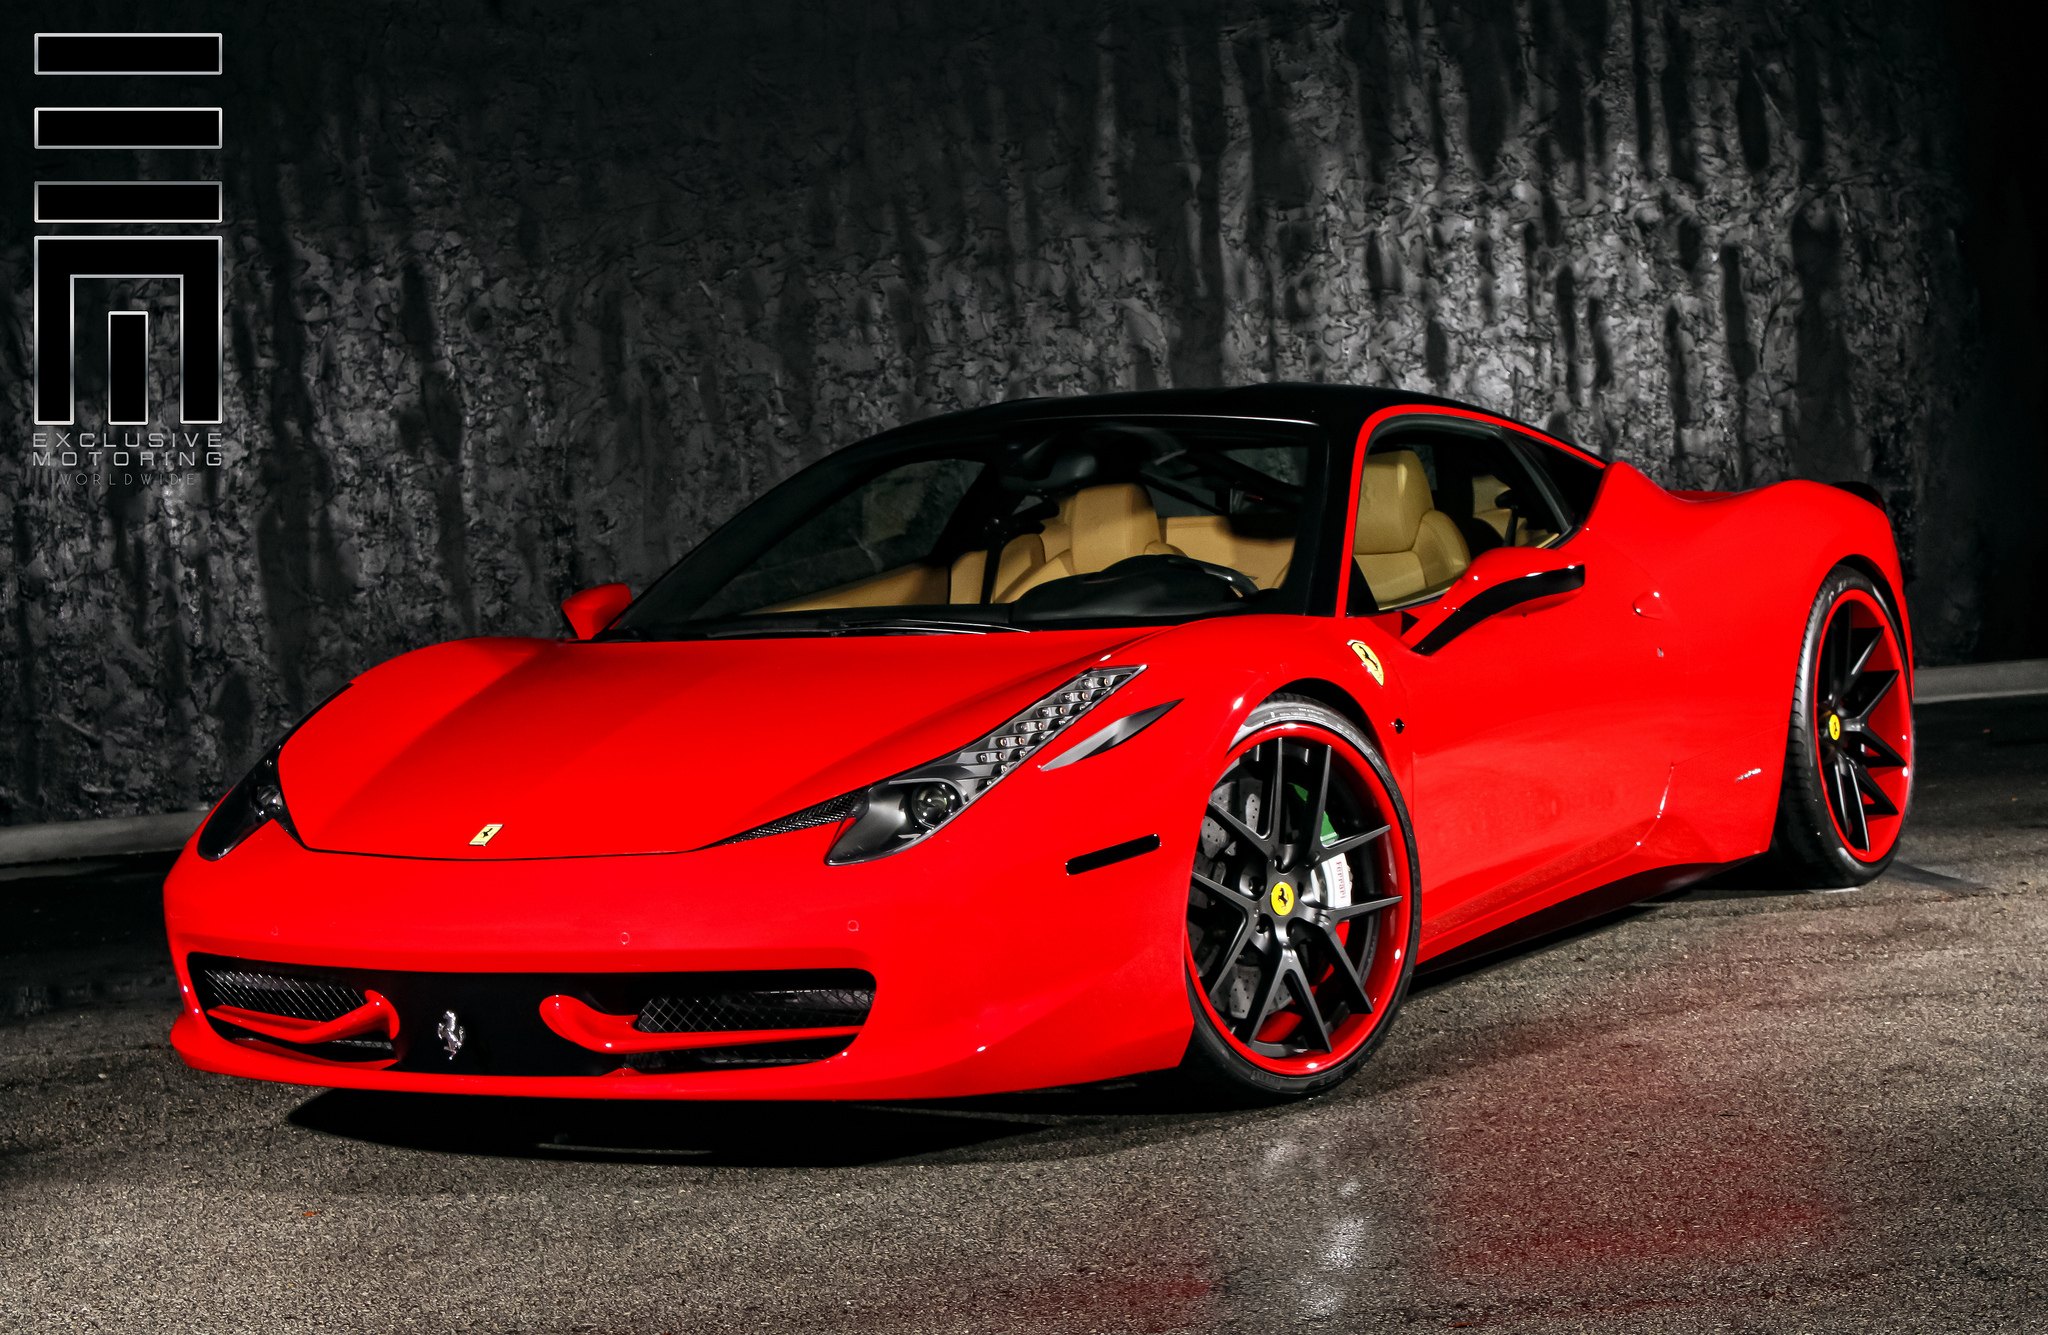 Ferrari 458 on Colormatched Custom Wheels - Photo by Exclusive Motoring